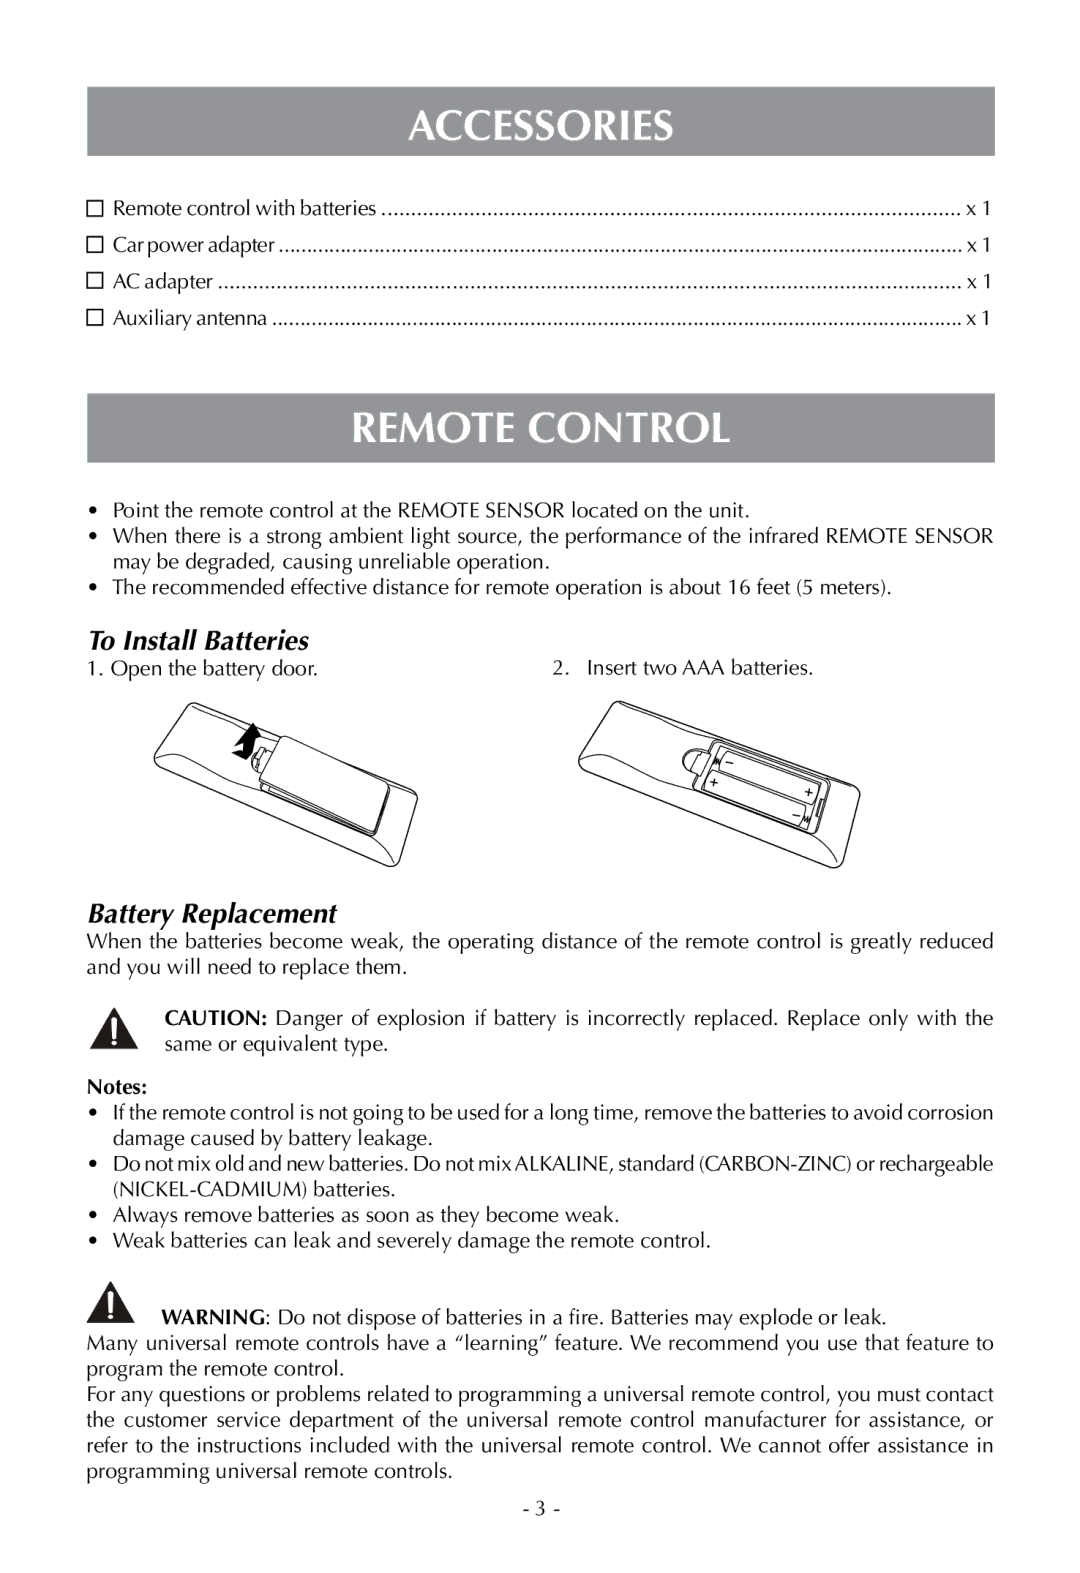 Venturer PLV16070 instruction manual Accessories, Remote control, To Install Batteries, Battery Replacement 